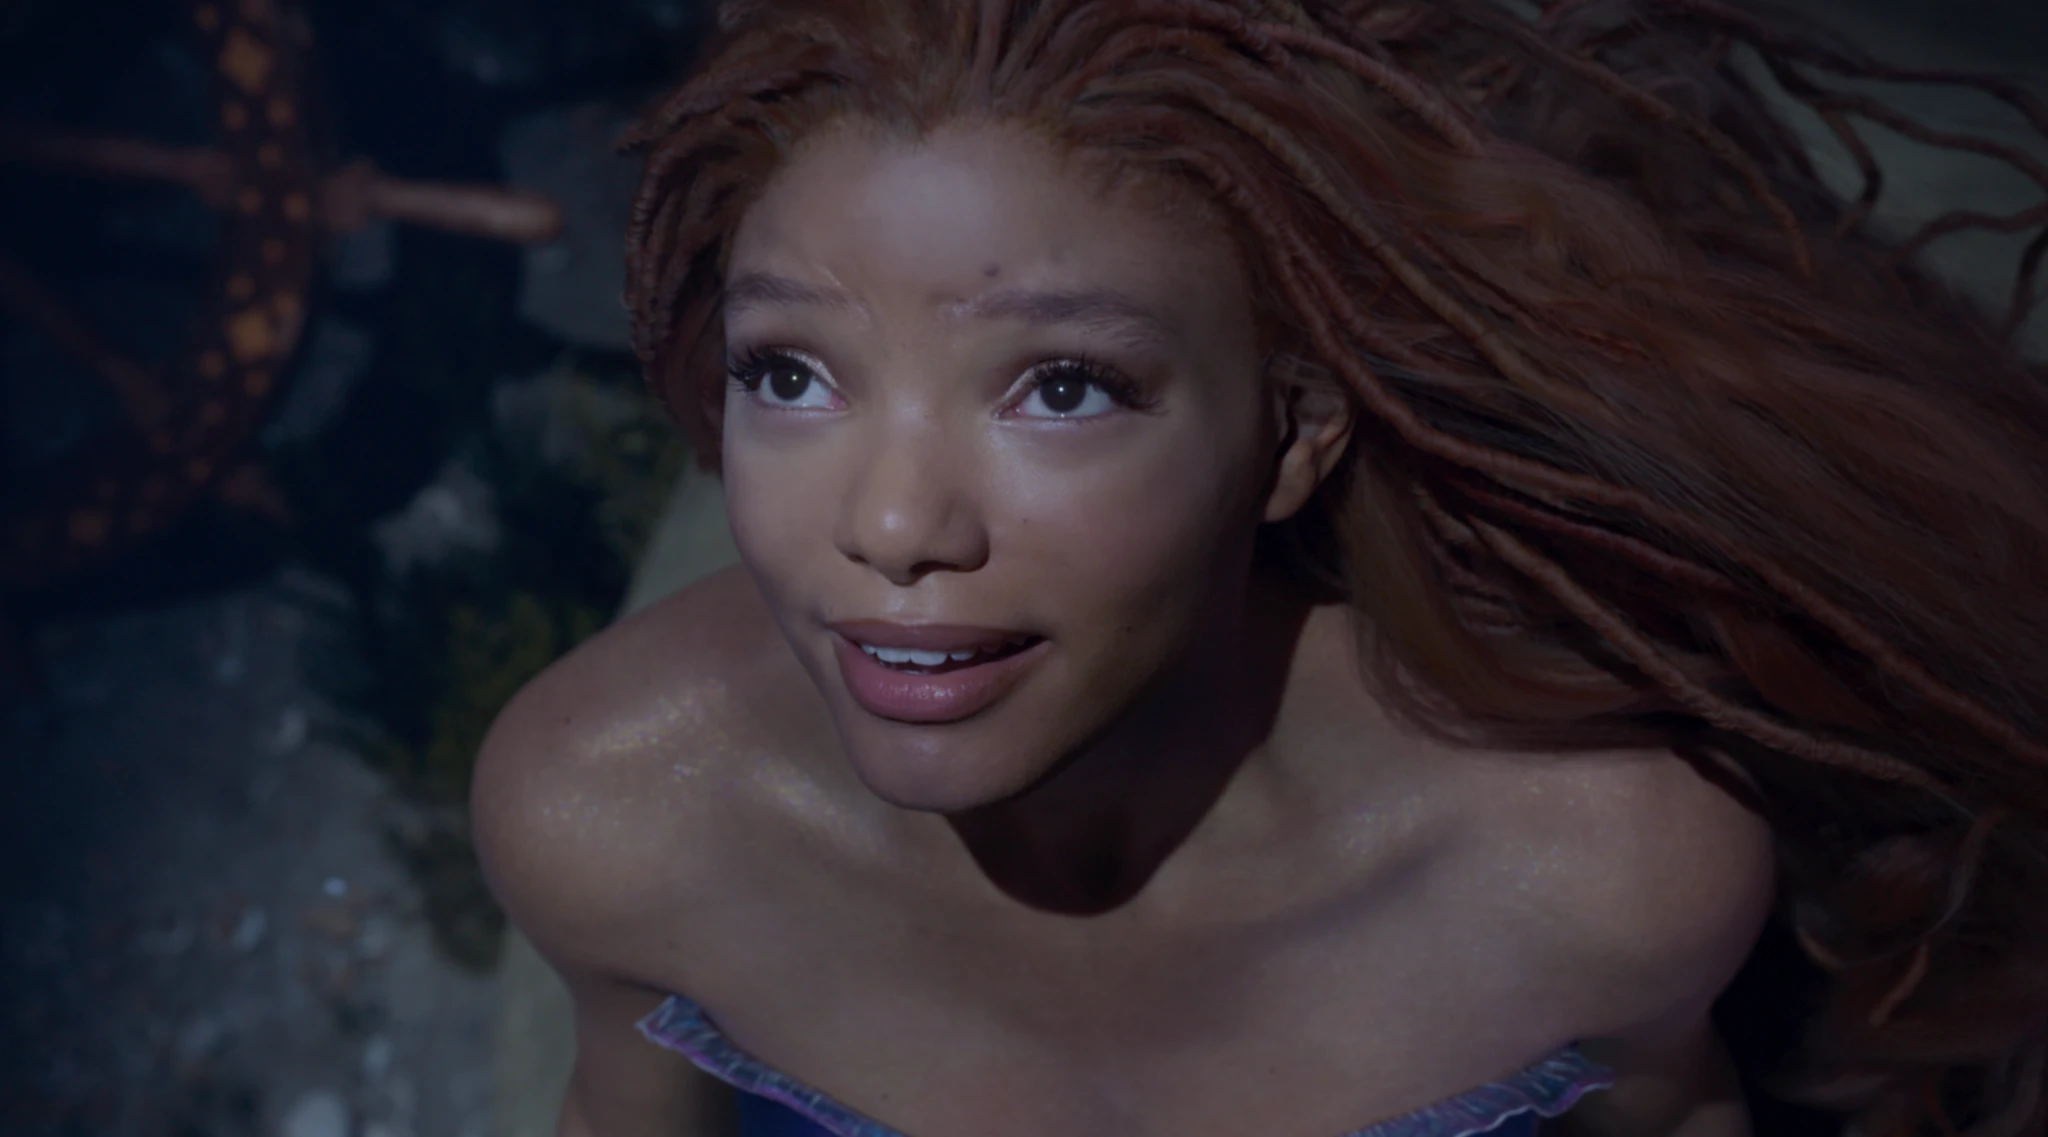 'The Little Mermaid' Teaser Trailer Reveals First Look at Halle Bailey as Ariel